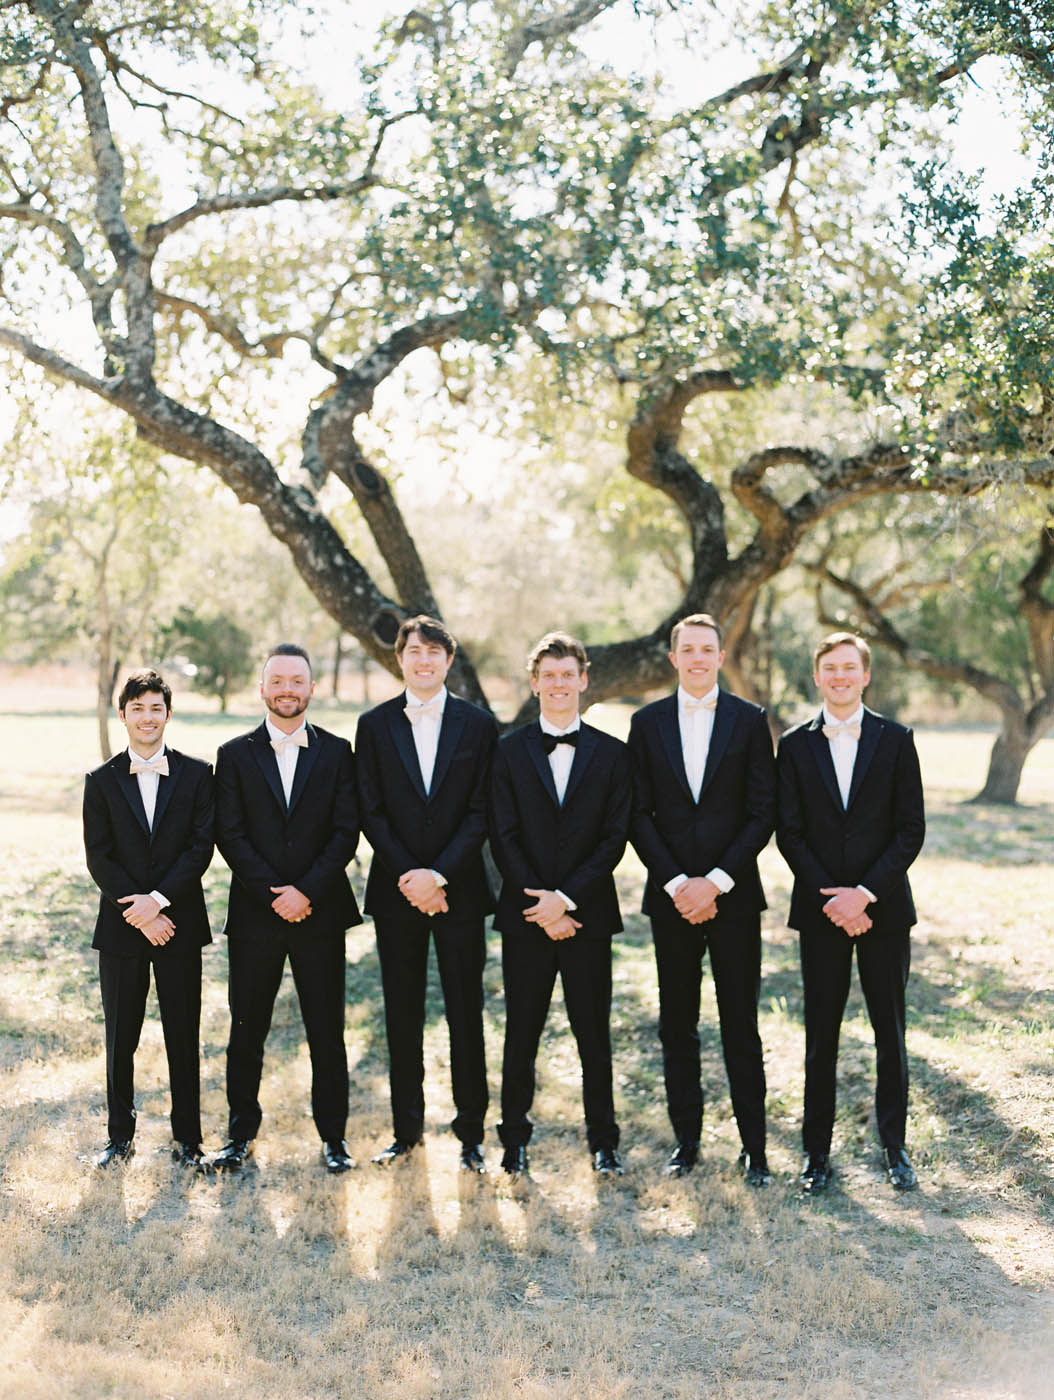 The groom and groomsmen group photo by the oak trees at The Arlo